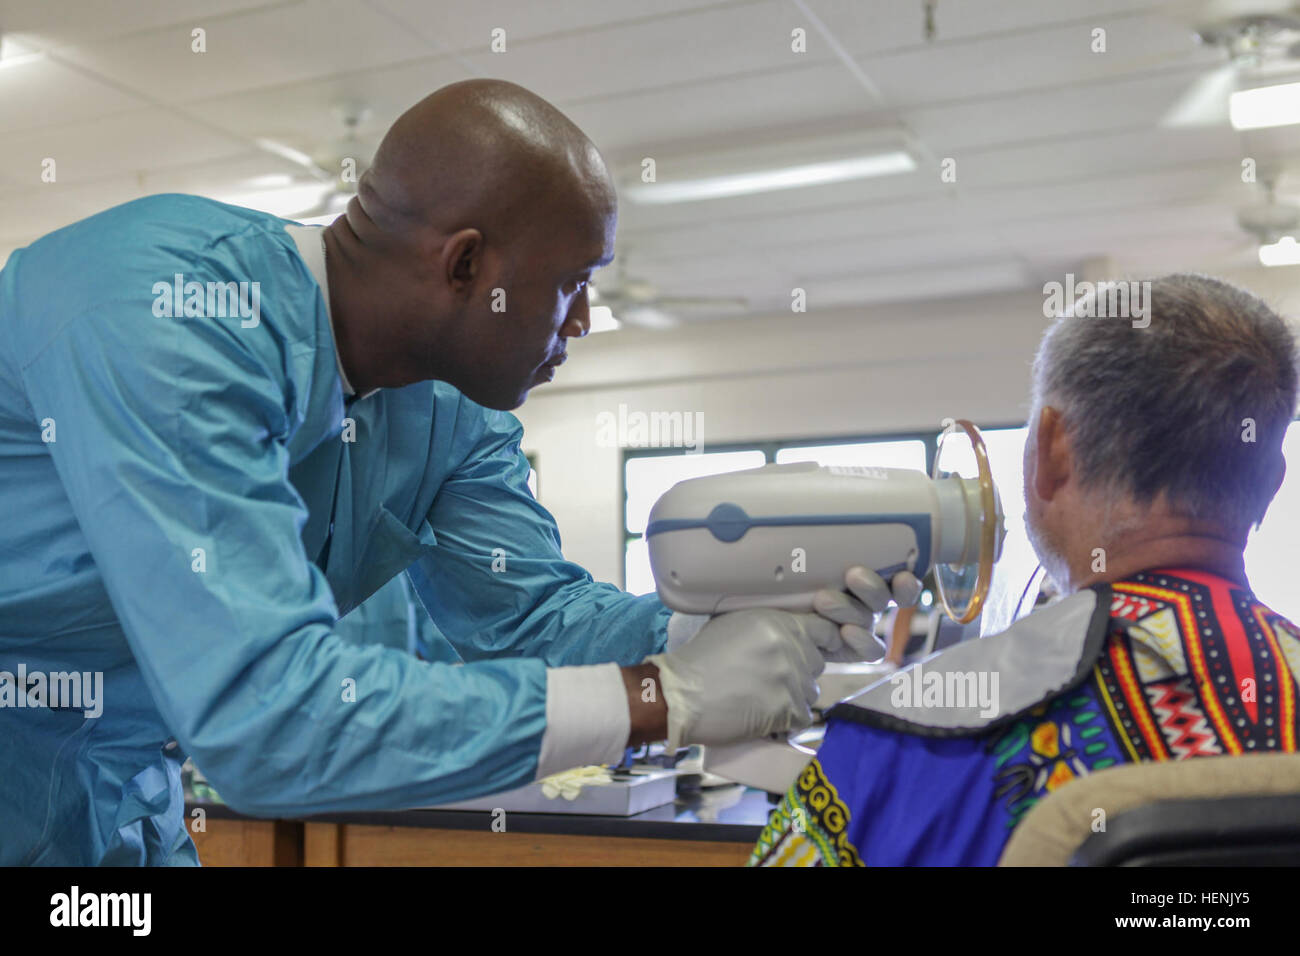 US Army Sergeant Yves Lorthe, with the 455th Medical Company (Dental Services) out of Devens, MA, scans a local patient with a hand held x-ray machine during Tropic Care 2014, Kapa'a Hawai'i, June 17, 2014. Tropic Care 2014 is an Innovative Readiness Training exercise that provides real world training in a joint civil and military environment while delivering world class medical care to the people of Kaua'i (U.S. Army photo by SPC Cory Long/Released) Tropic Care 2014 140617-A-BM801-012 Stock Photo